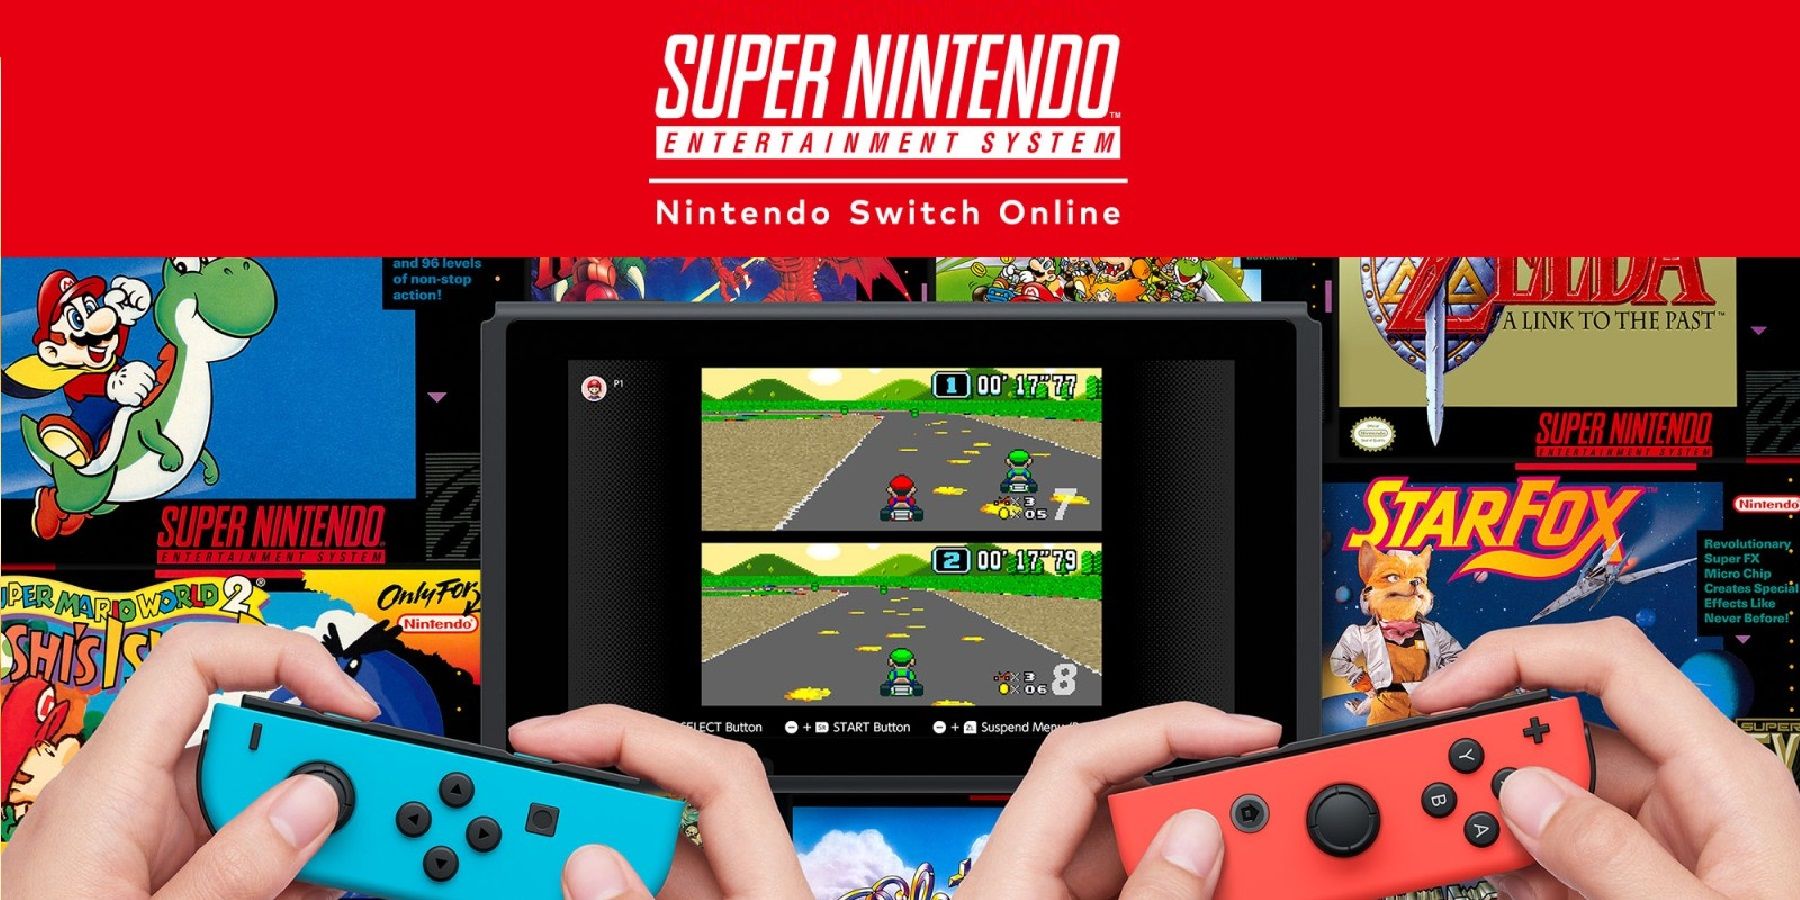 Free NES and SNES games coming to Nintendo Switch Online in May